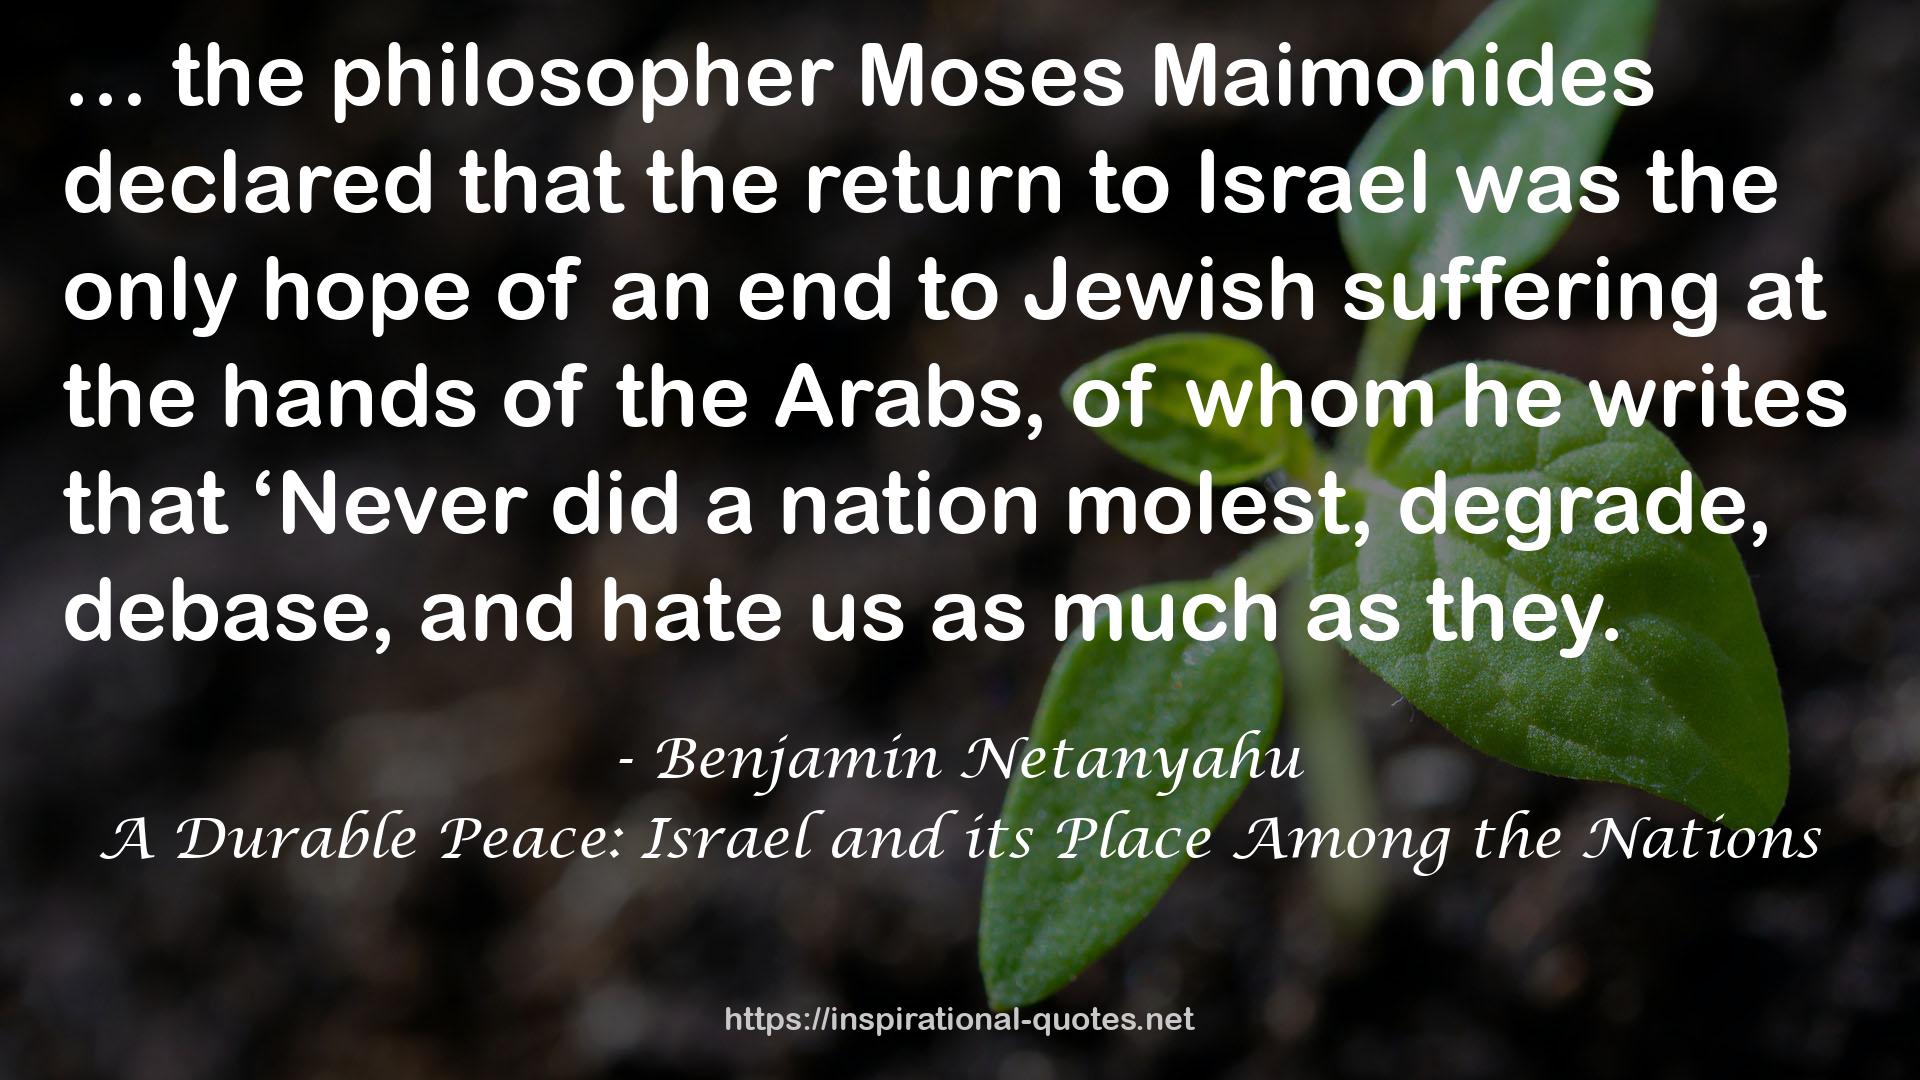 A Durable Peace: Israel and its Place Among the Nations QUOTES